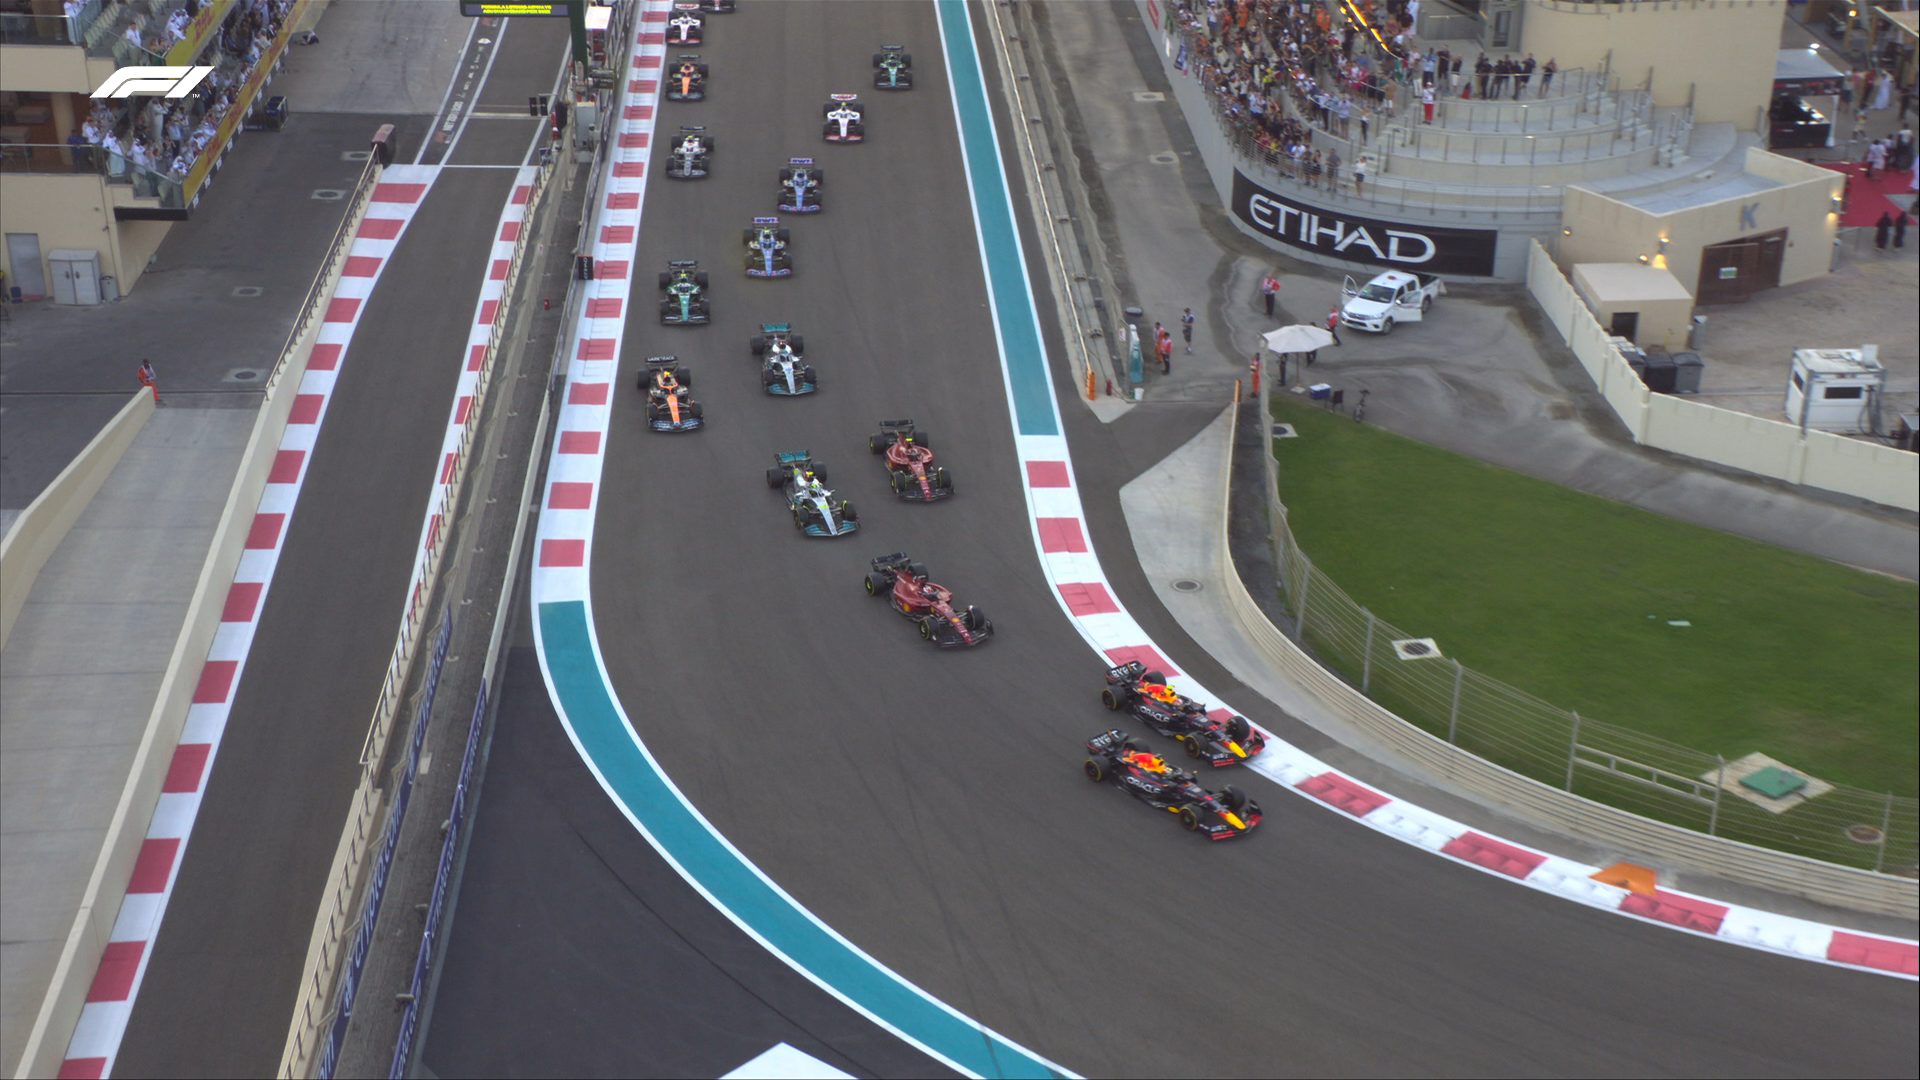 Red Bull, Ferrari, and Mercedes battle it out at the final race of the 2022 season in Abu Dhabi